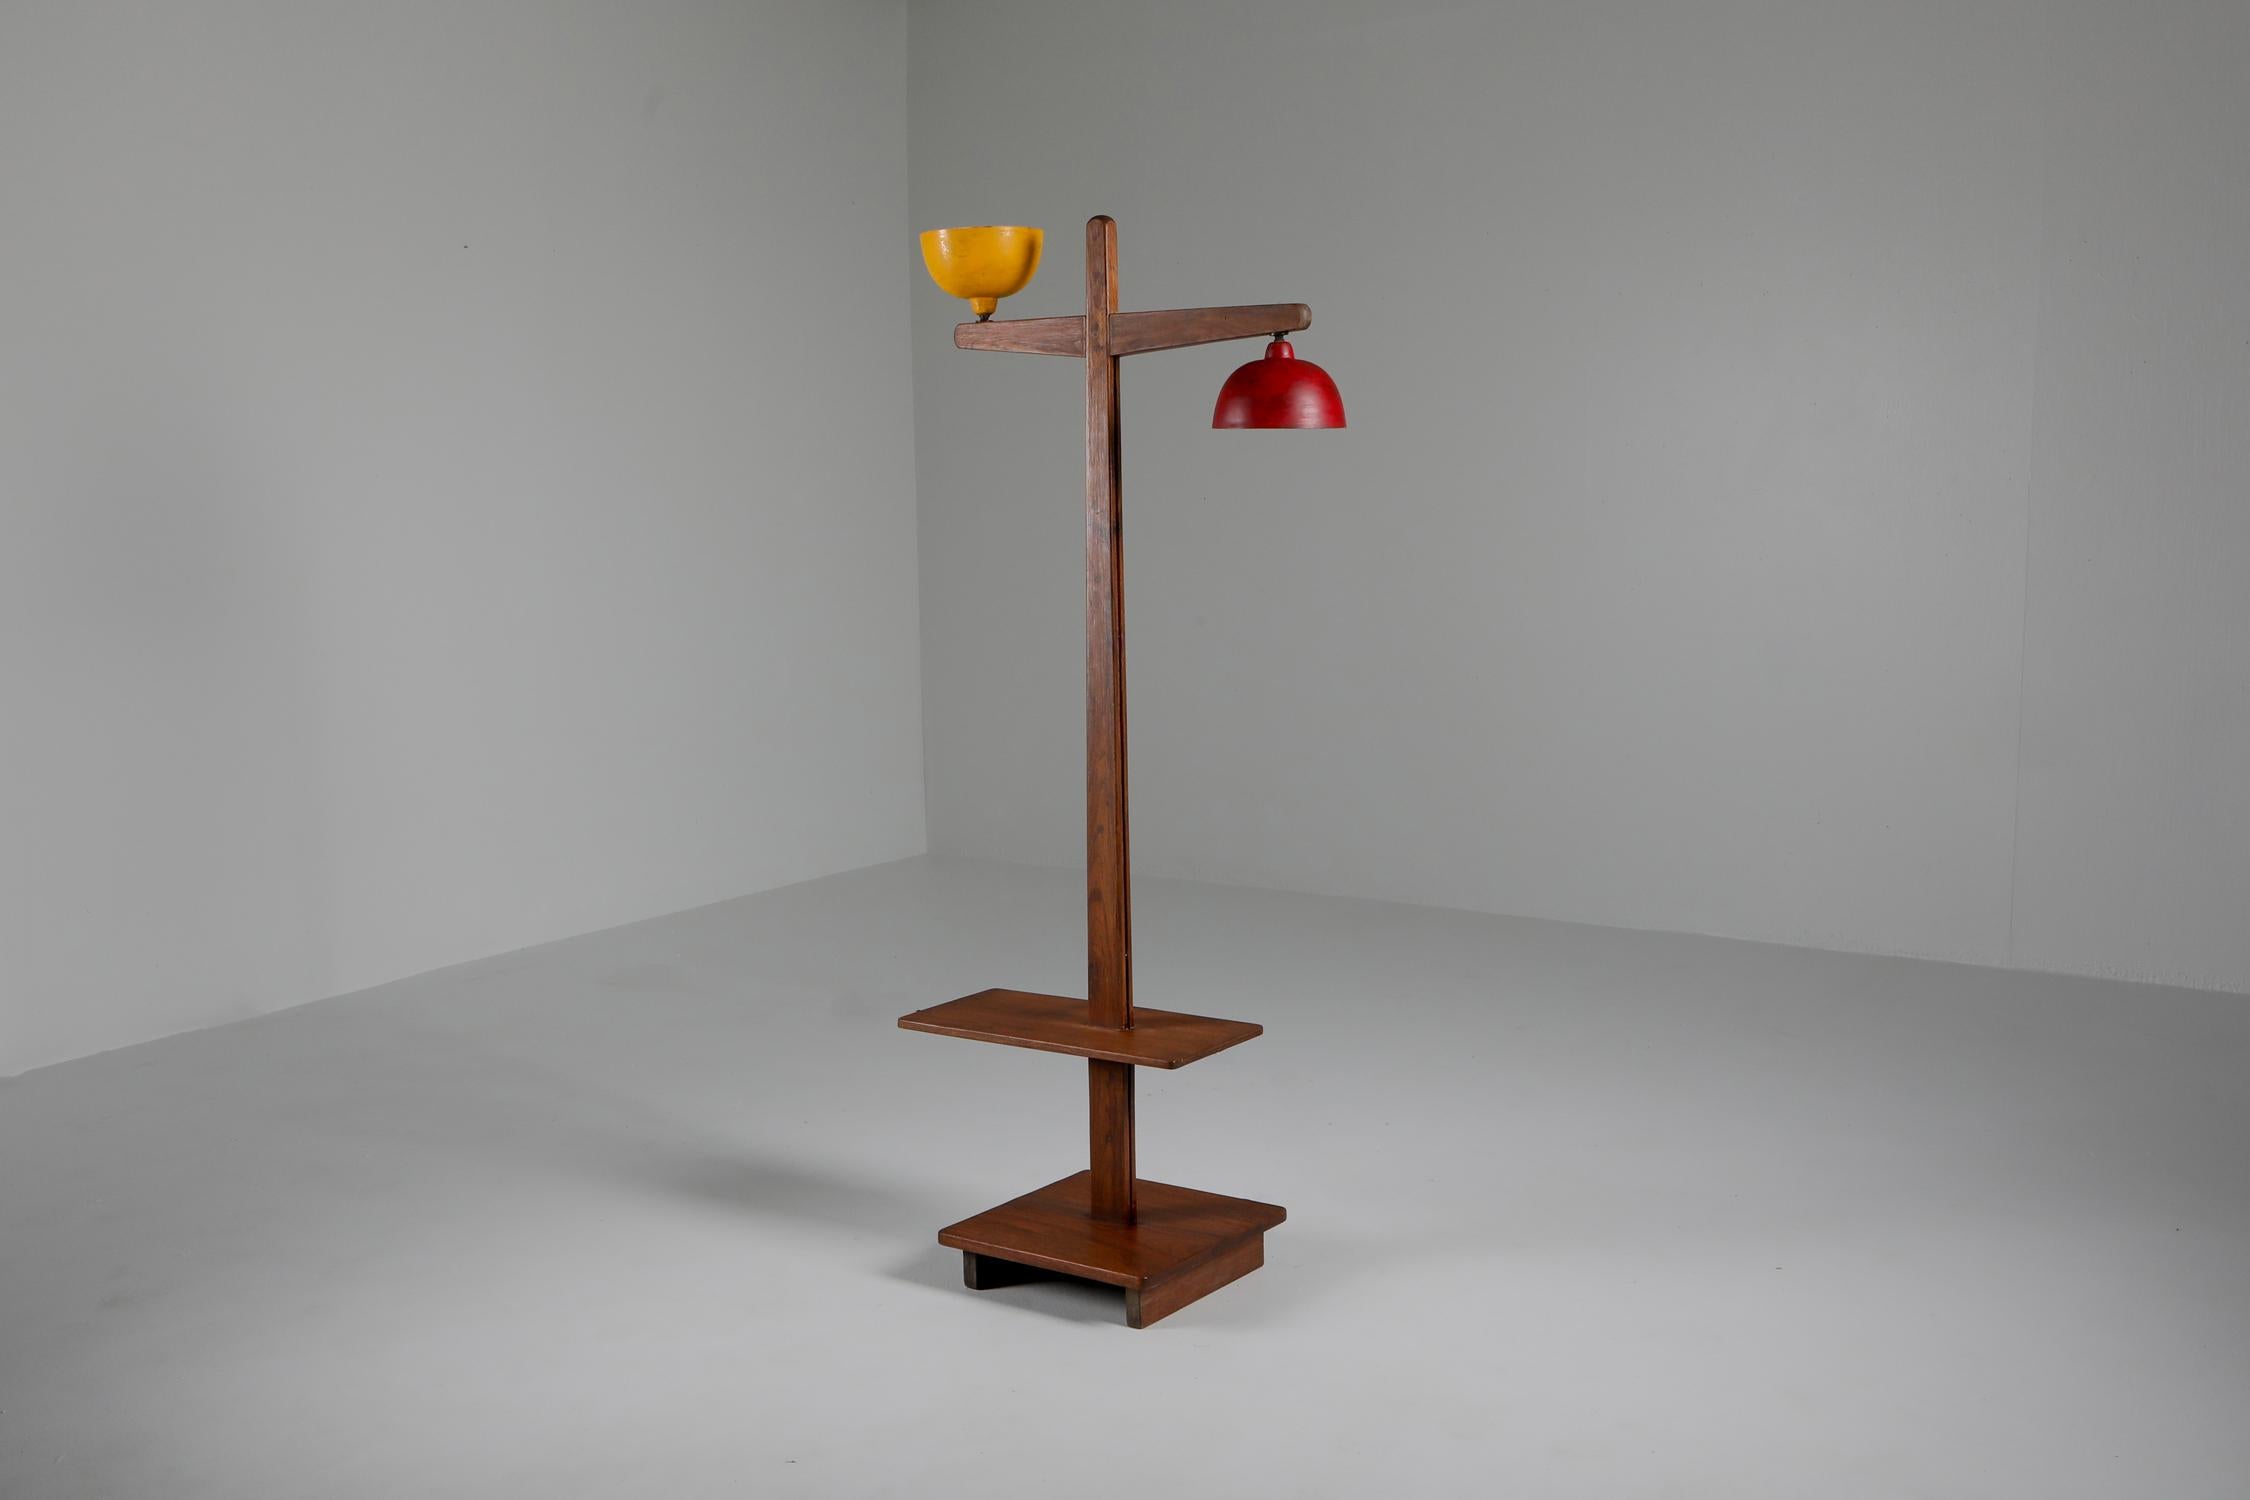 Indian Pierre Jeanneret 'Standard Lamp' PJ-100101 in Solid Teak with Yellow Shade